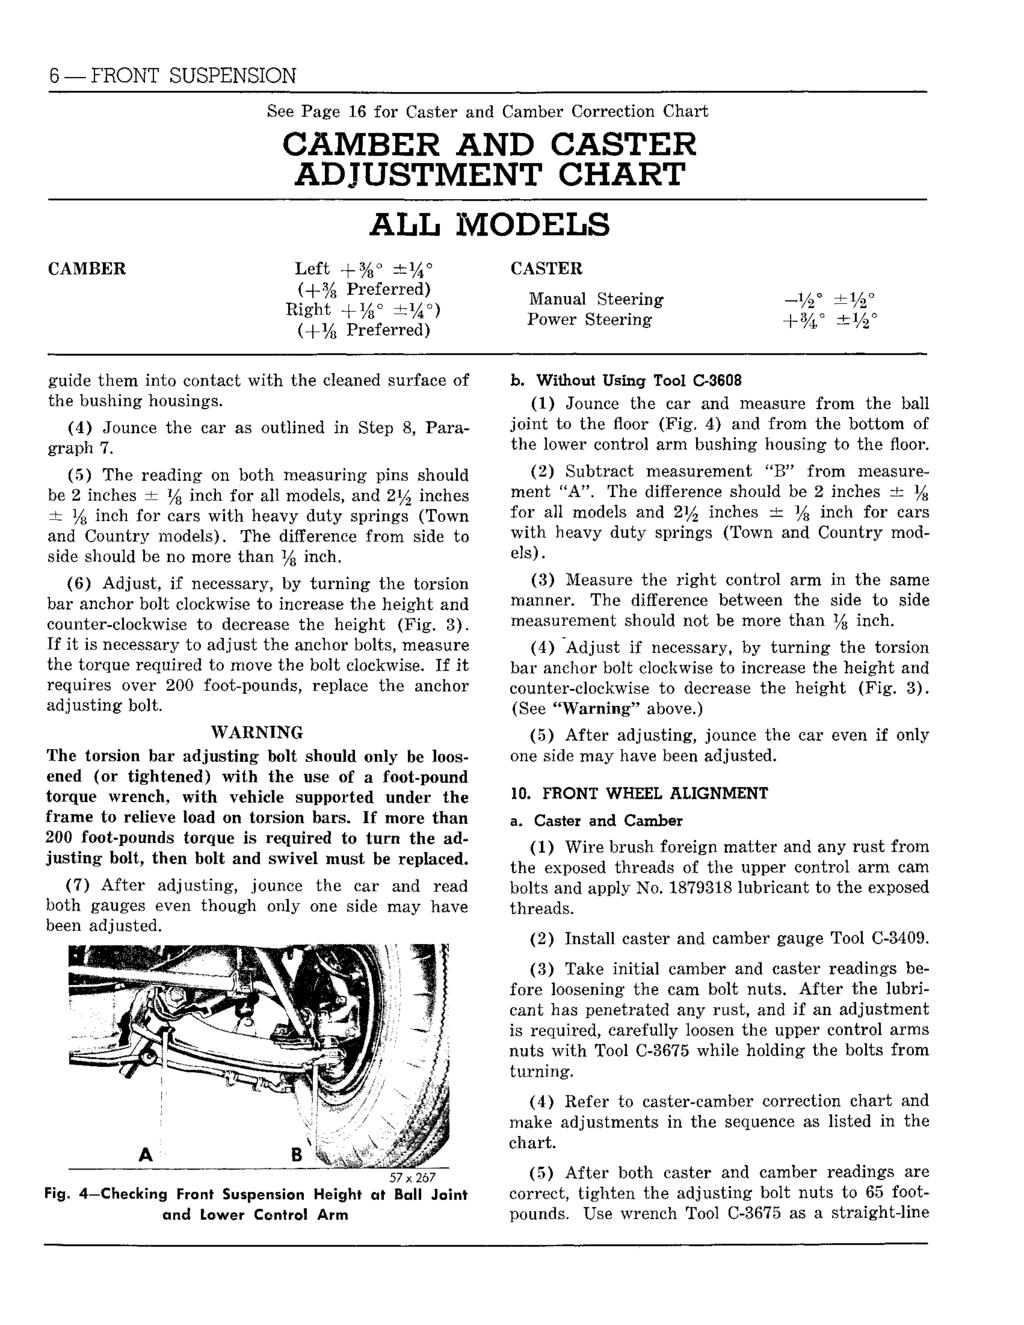 6 FRONT SUSPENSION See Page 16 for Caster and Camber Correction Chart CAMBER AND CASTER ADJUSTMENT CHART ALL MODELS CAMBER Left +% ±14 CASTER (+% "Preferred) * P W e r S t e e * +% ^ guide them into